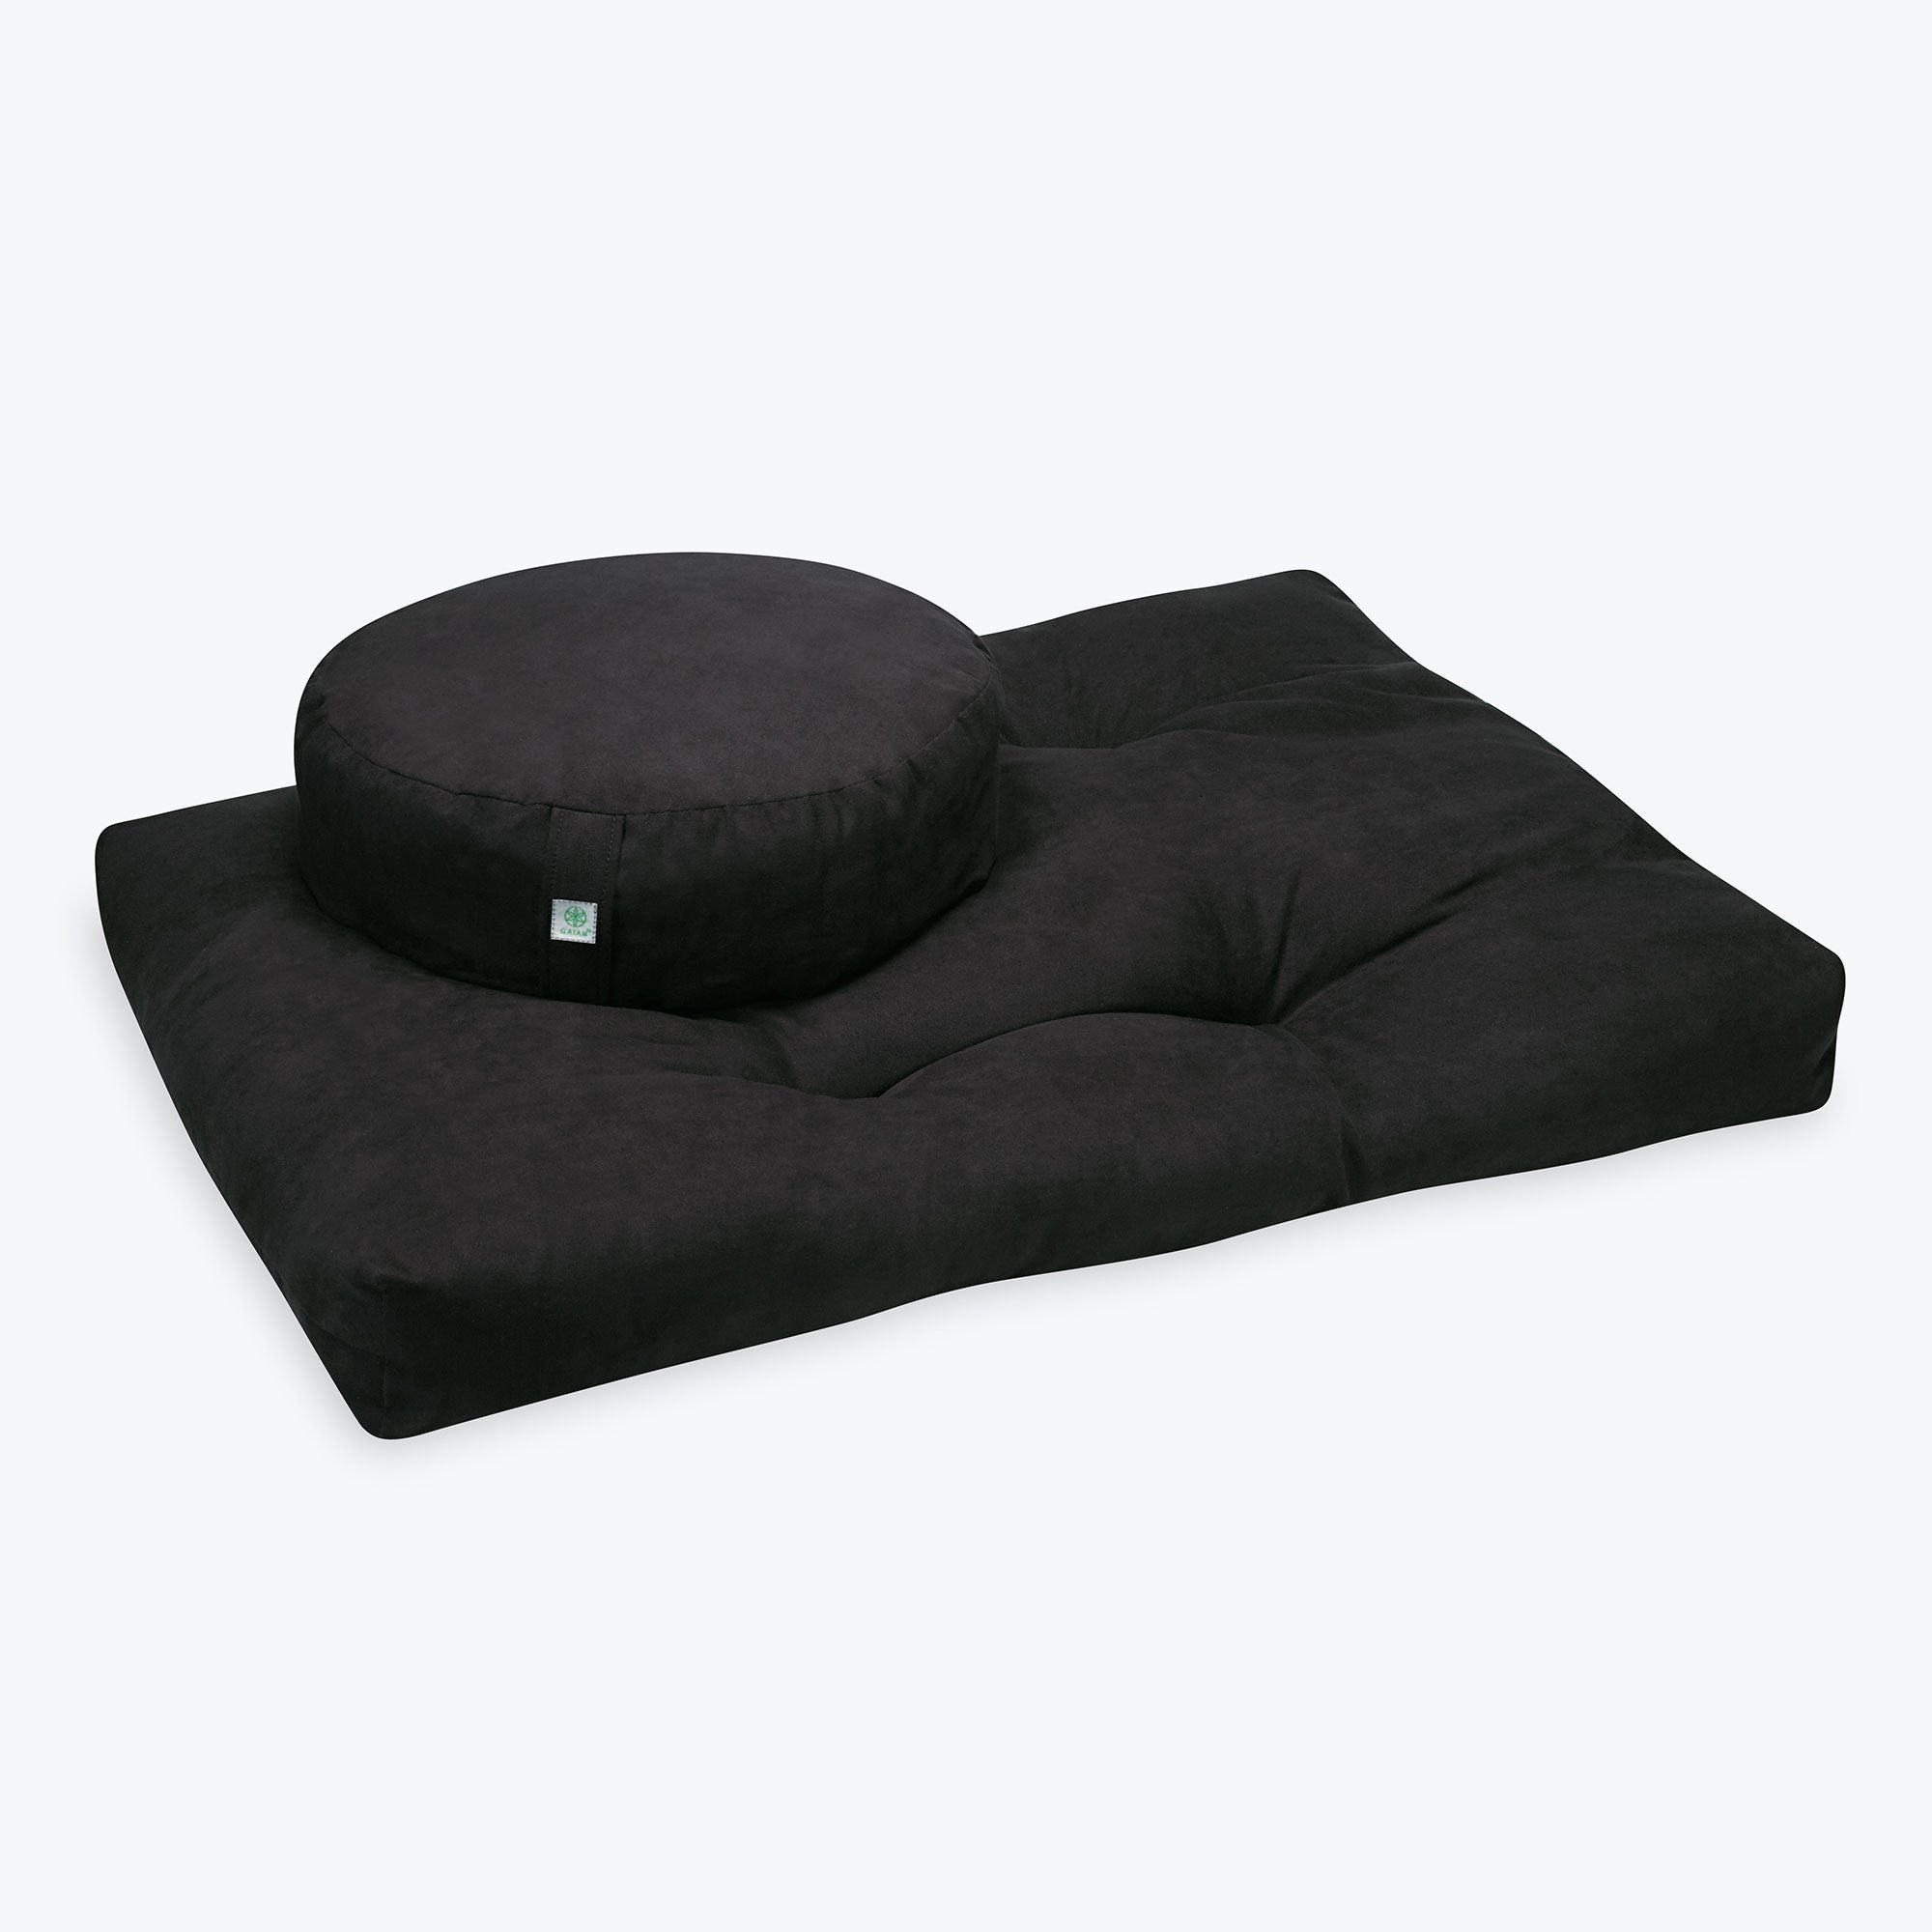 Meditation Pillows, Cushions, and Mats for Sale – Gaiam Meditation